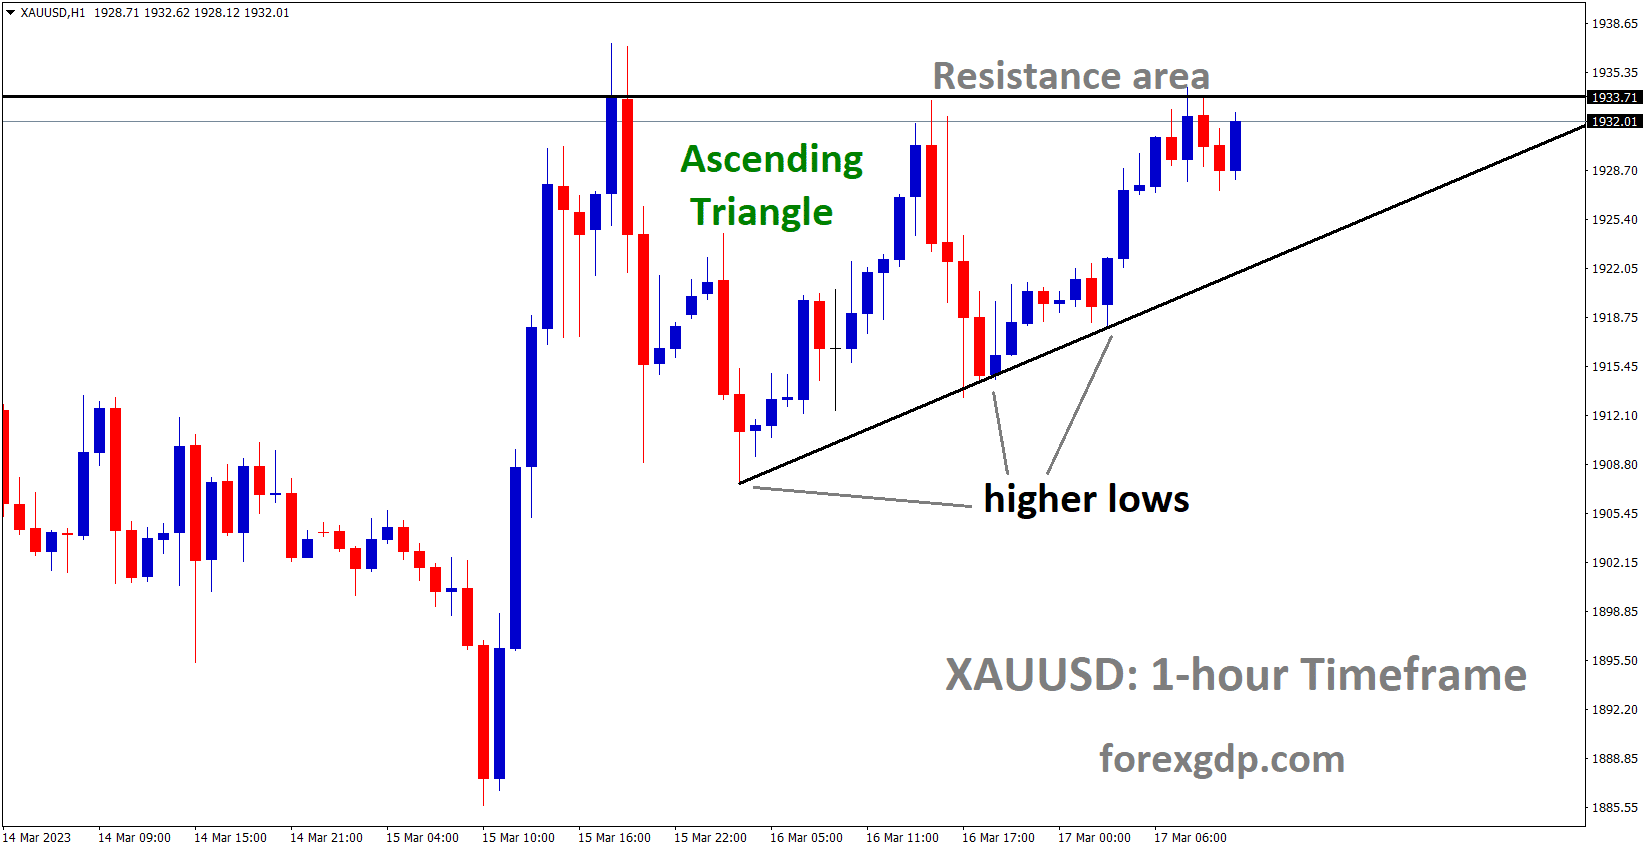 XAUUSD Gold price is moving in an Ascending triangle pattern and the market has reached the horizontal resistance area of the pattern.